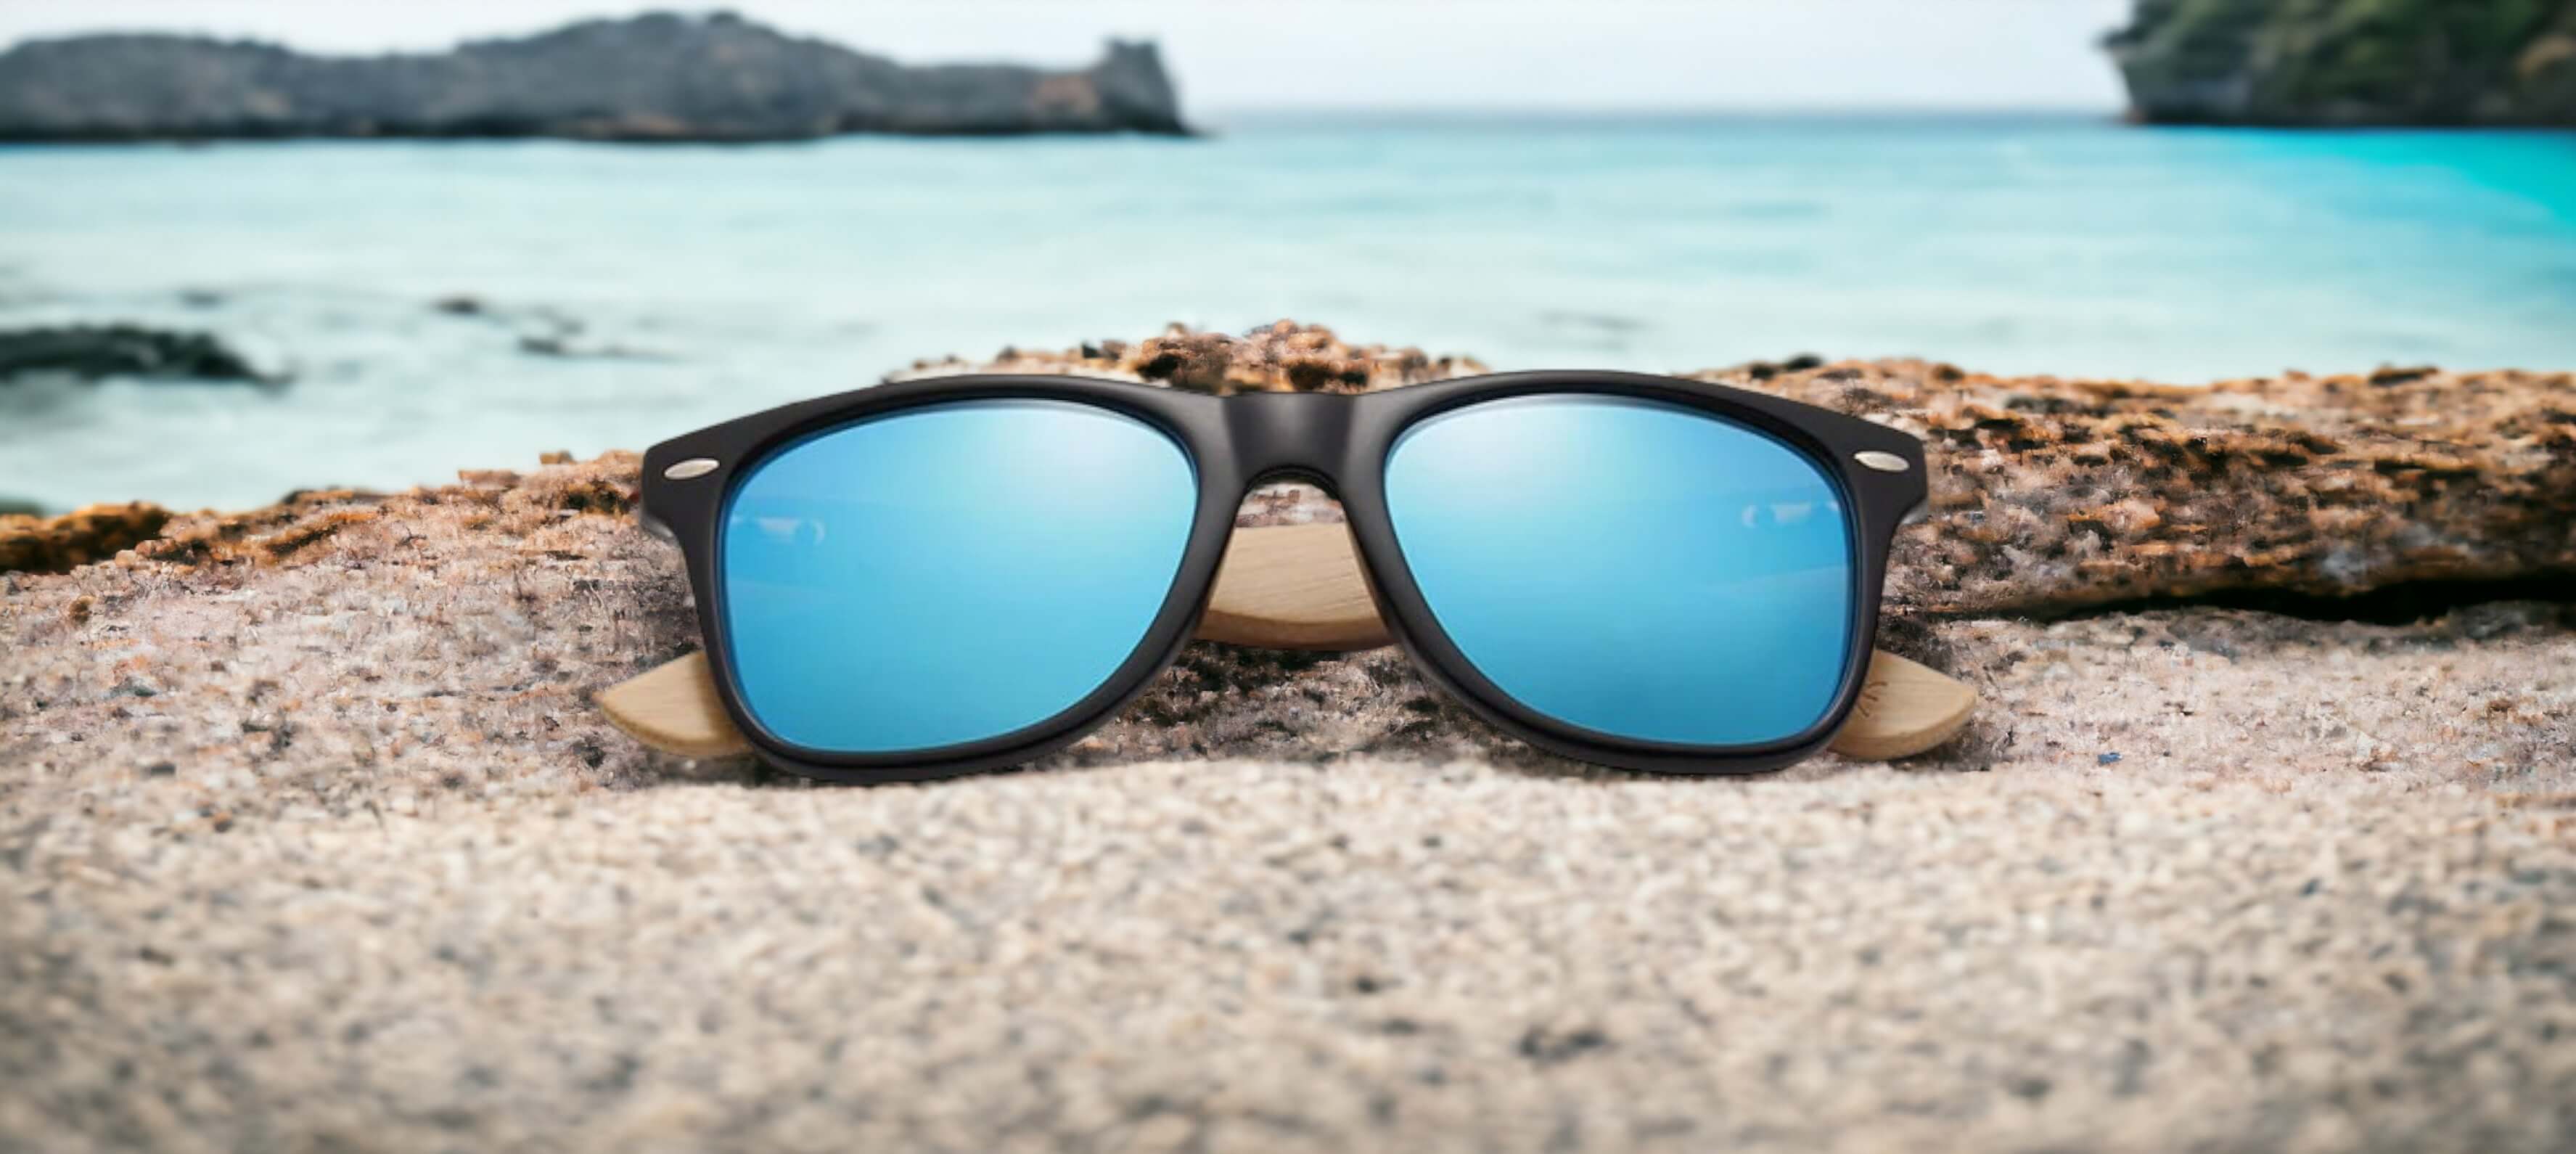 Updated: 6 Best Bets for Cheap Prescription Sunglasses Online (with Coupons)